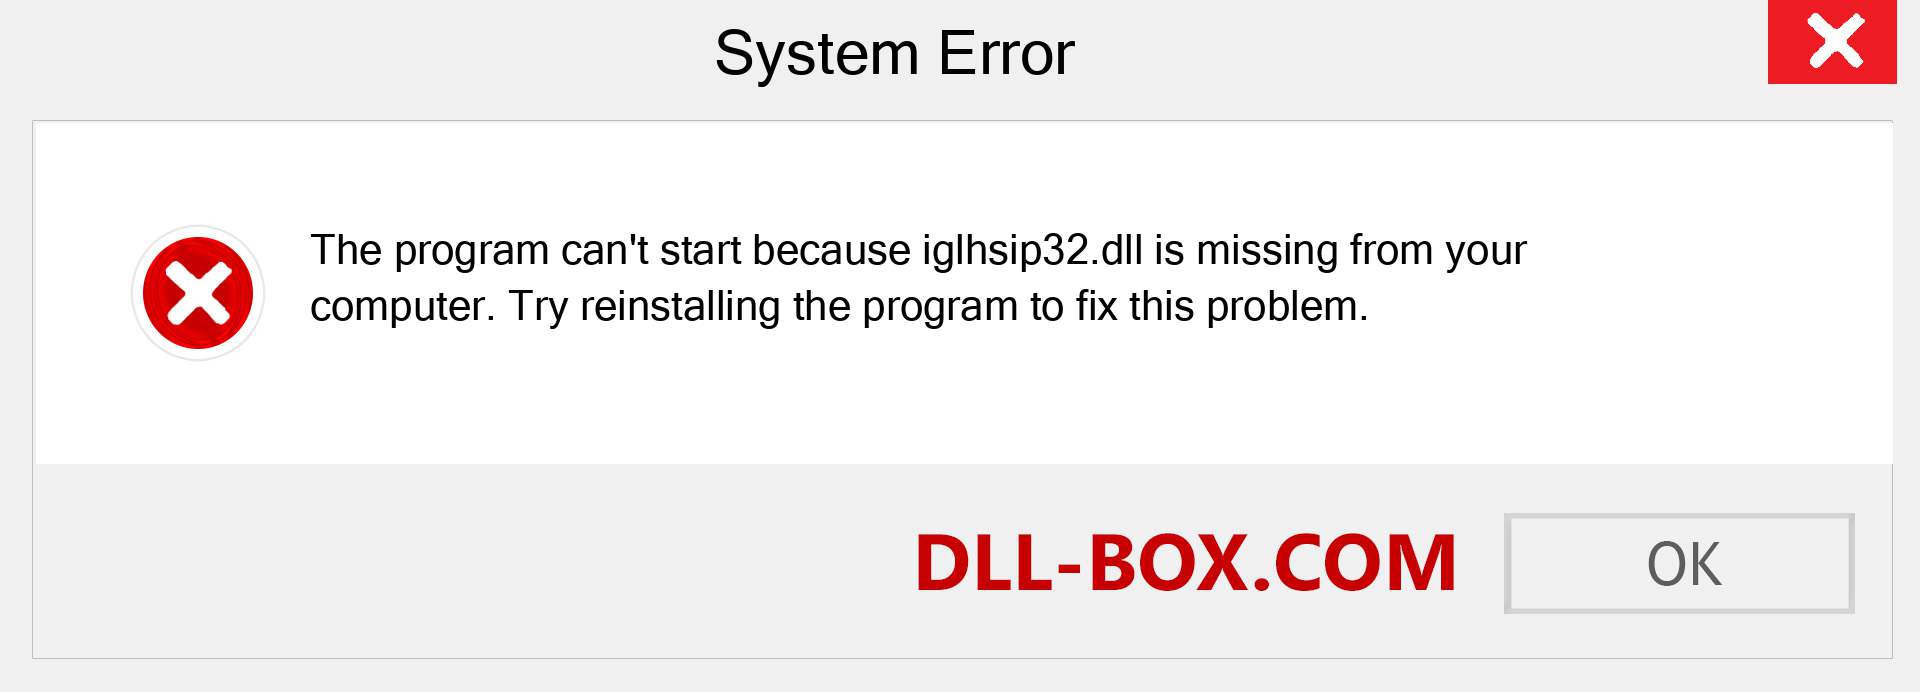  iglhsip32.dll file is missing?. Download for Windows 7, 8, 10 - Fix  iglhsip32 dll Missing Error on Windows, photos, images